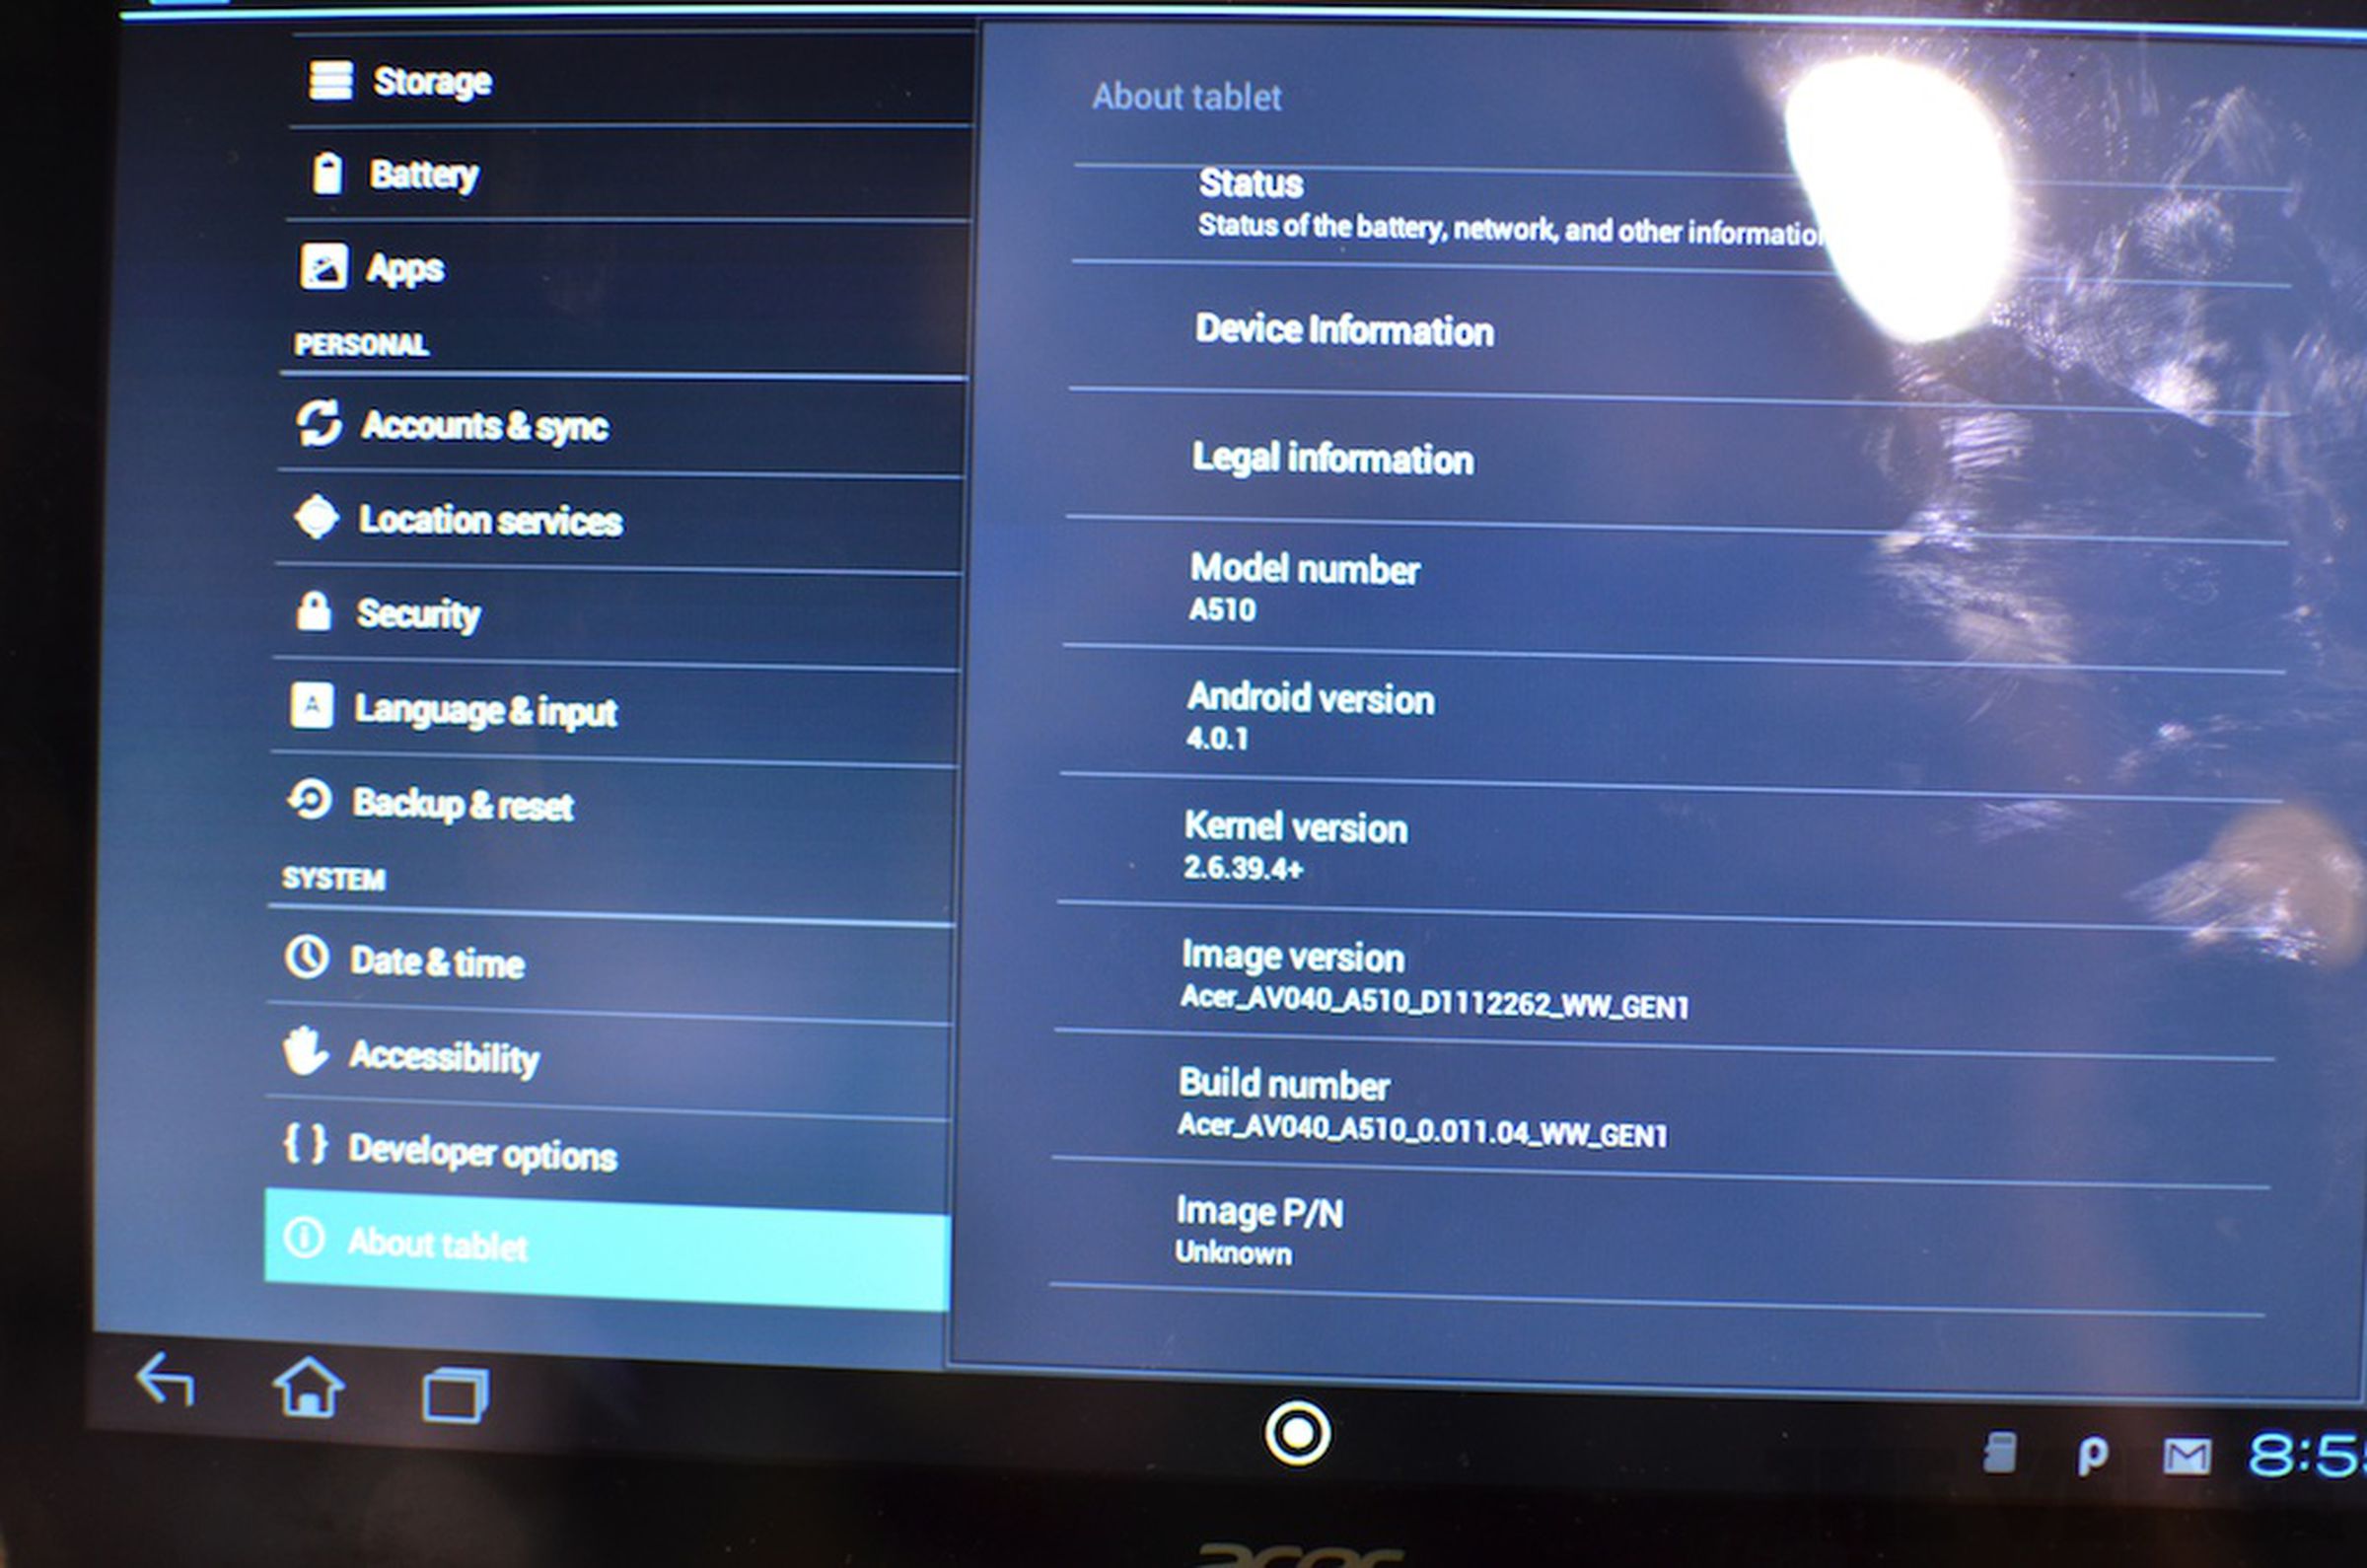 Acer Iconia A510 pictures